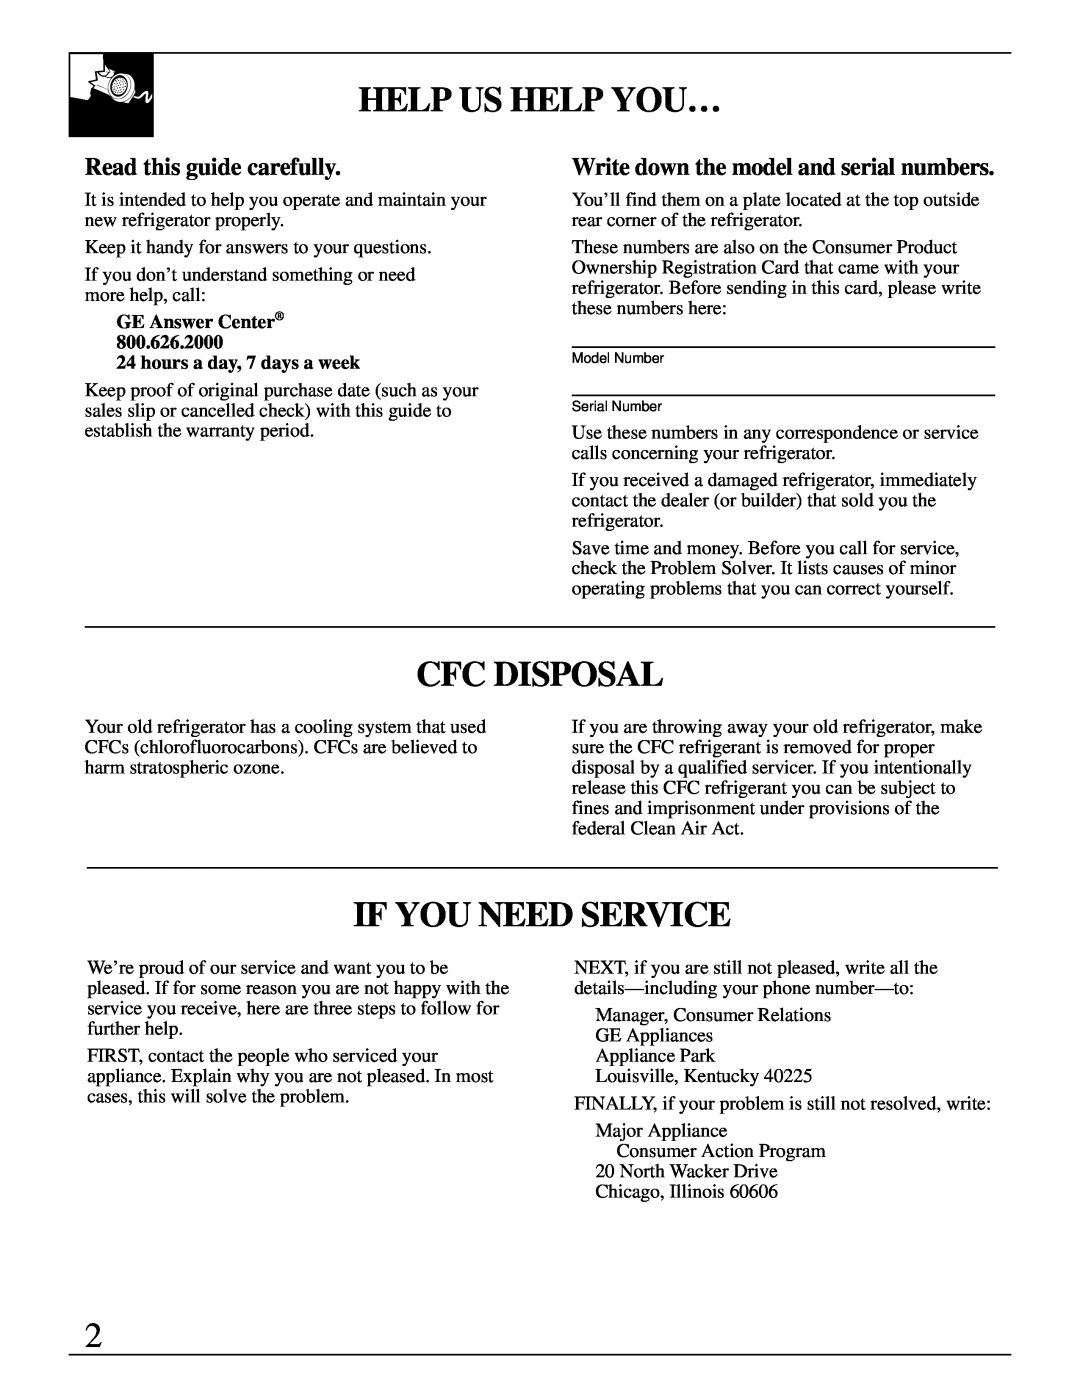 GE TAX4, SC4 warranty Help Us Help You…, Cfc Disposal, If You Need Service, Read this guide carefully 